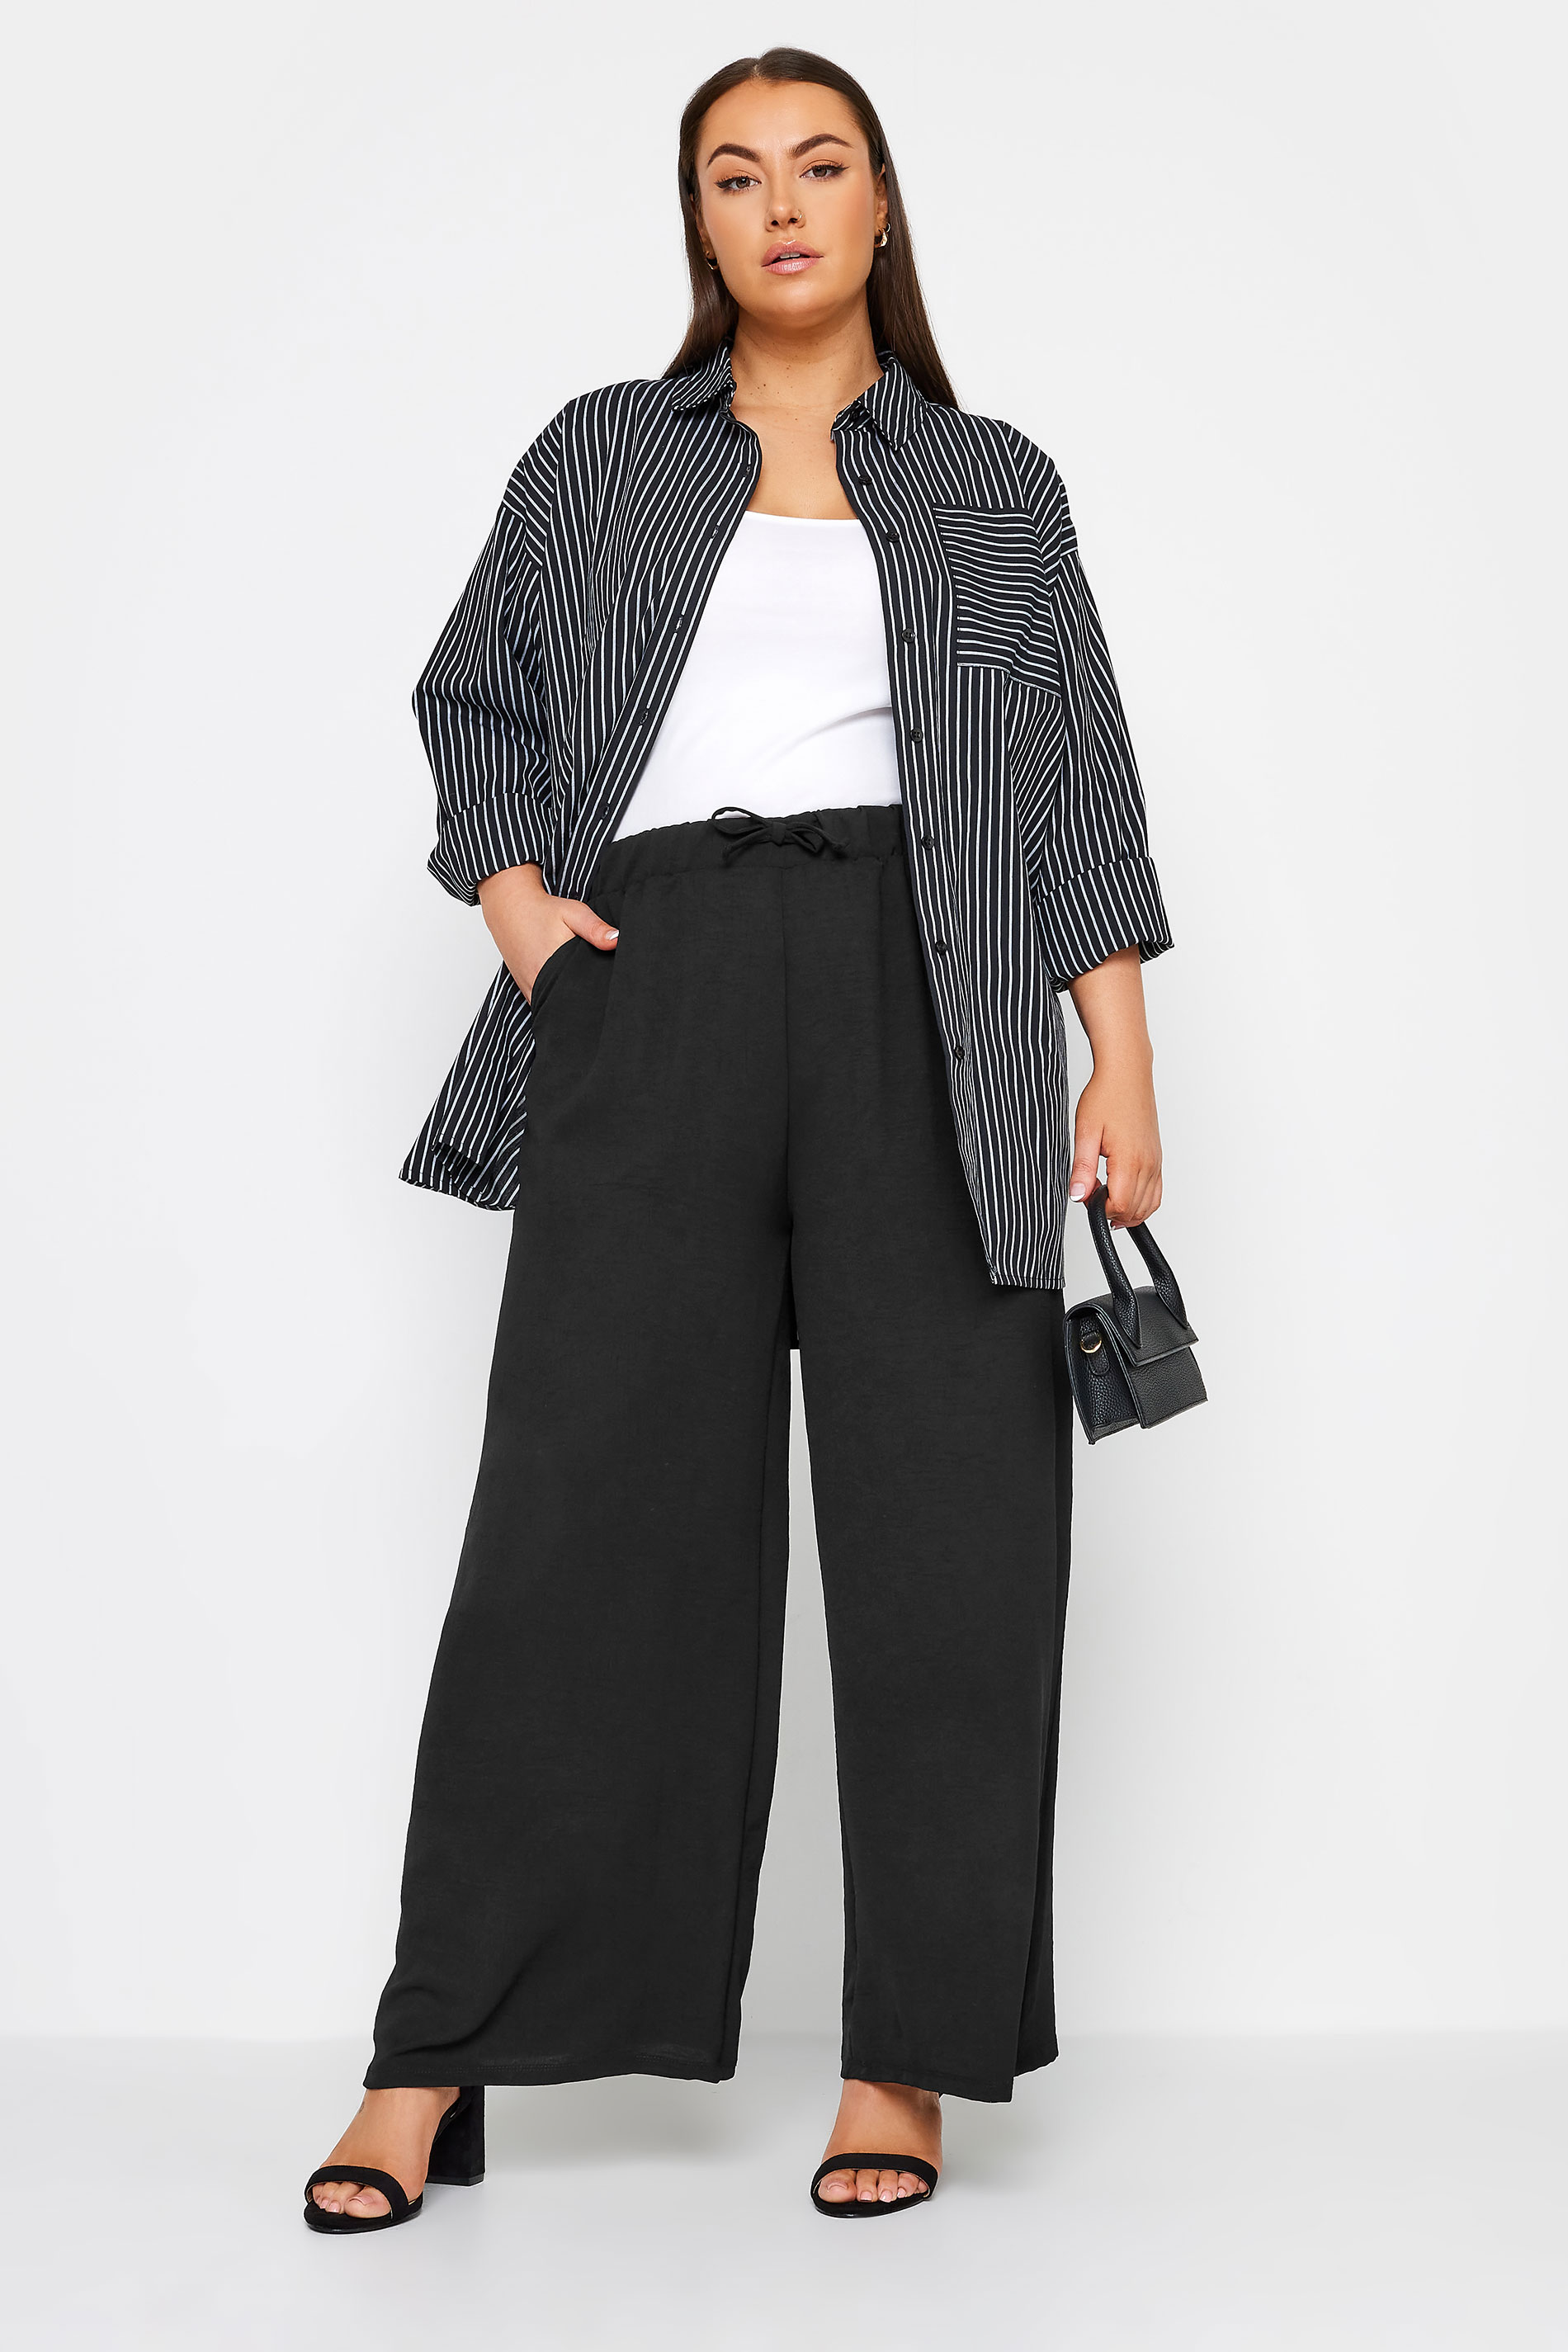 Buy Monochrome Jersey Wide Leg Trousers from the Next UK online shop